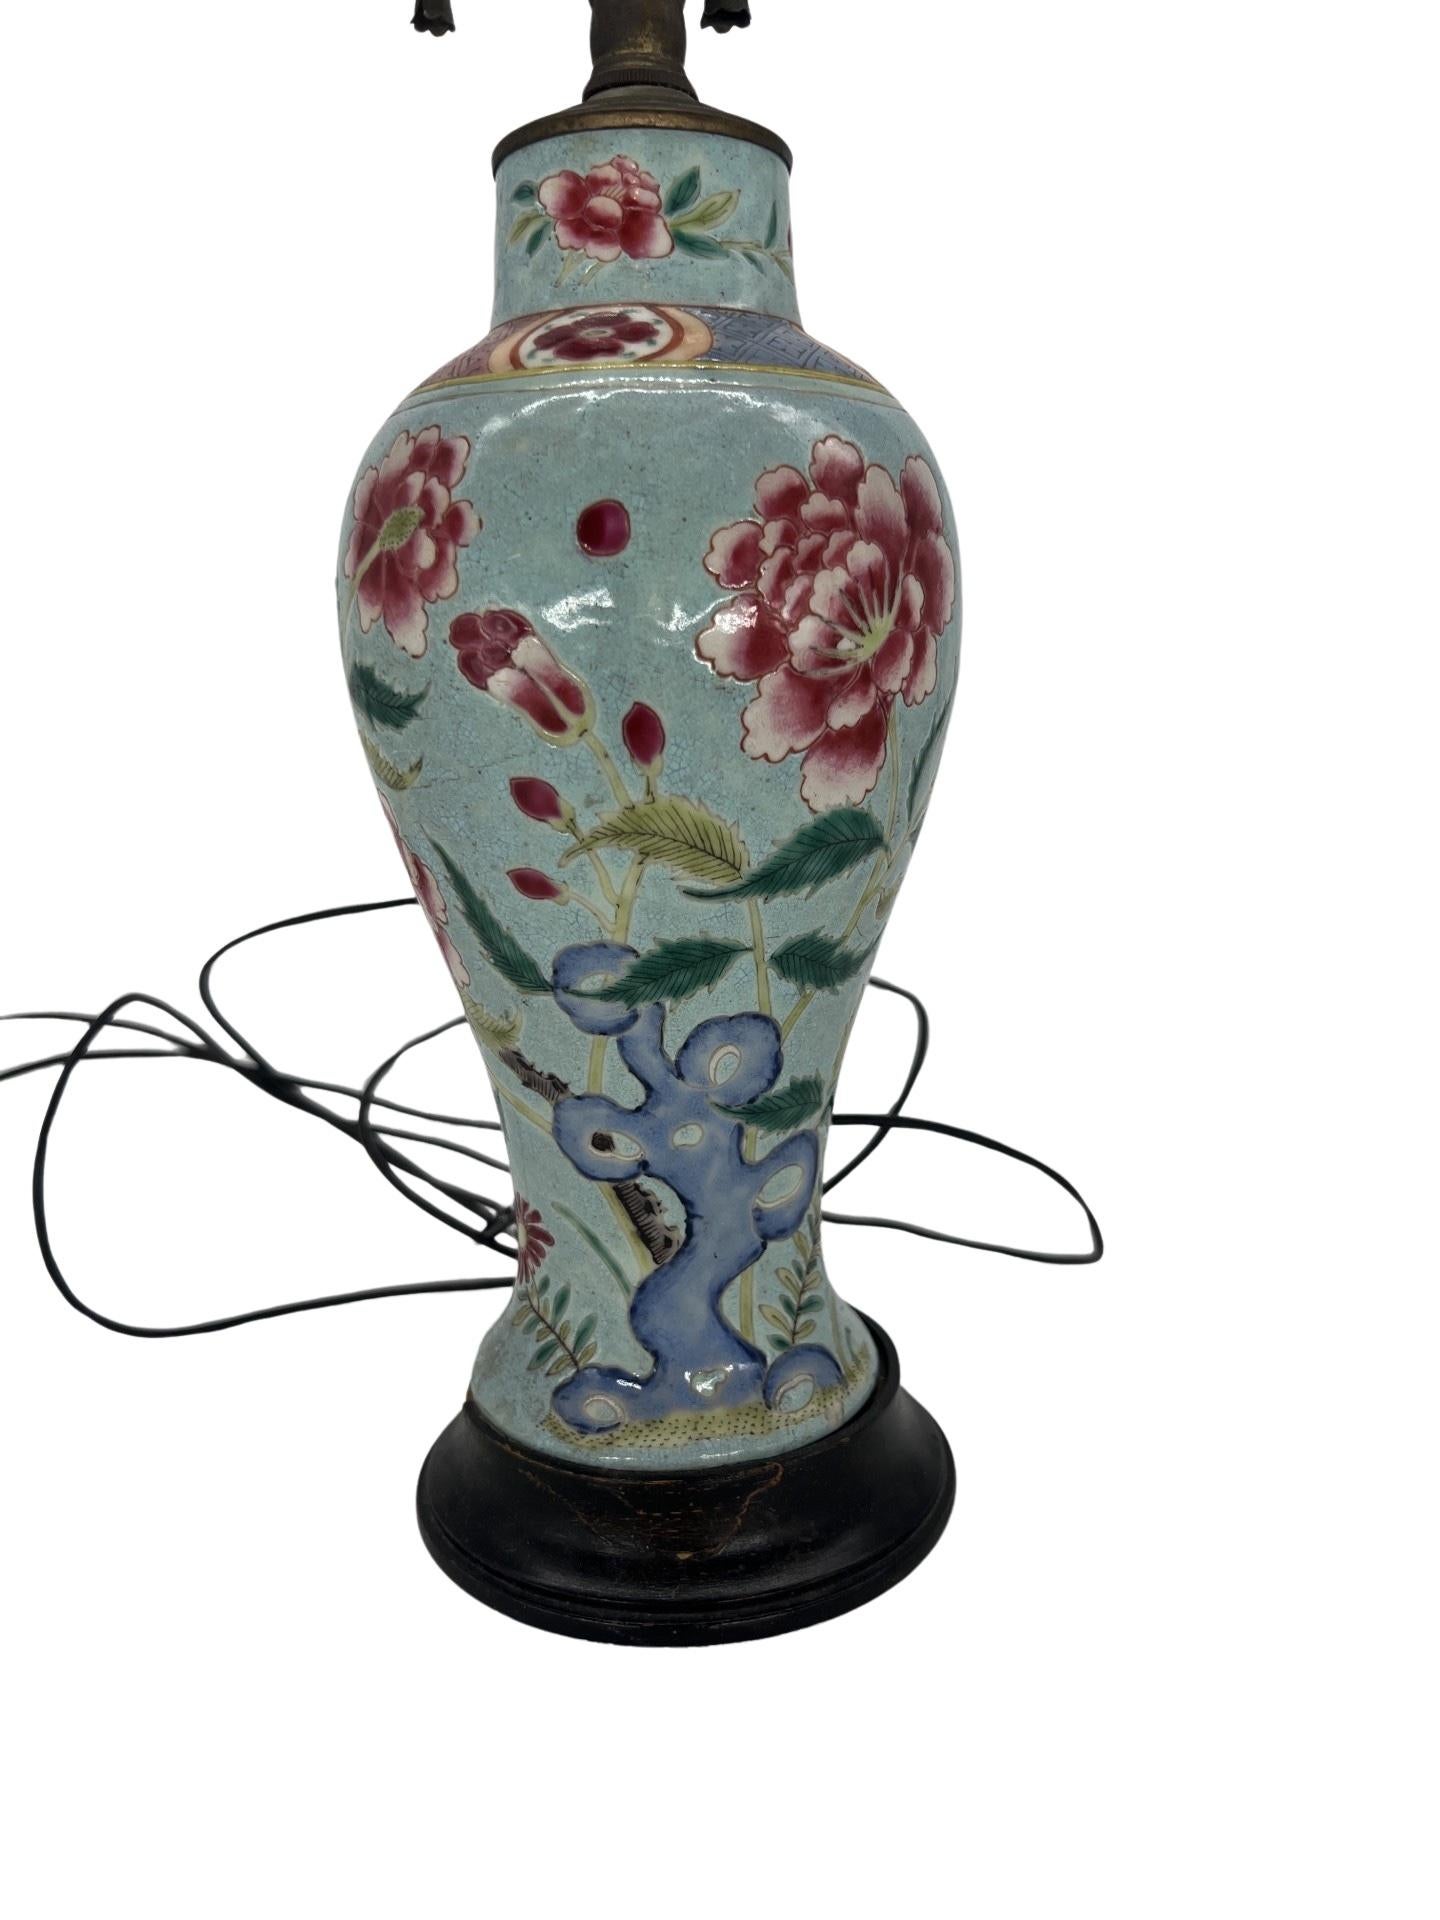 19th Century Chinese Nyonya Ware Porcelain Vase Mounted as a Lamp For Sale 3